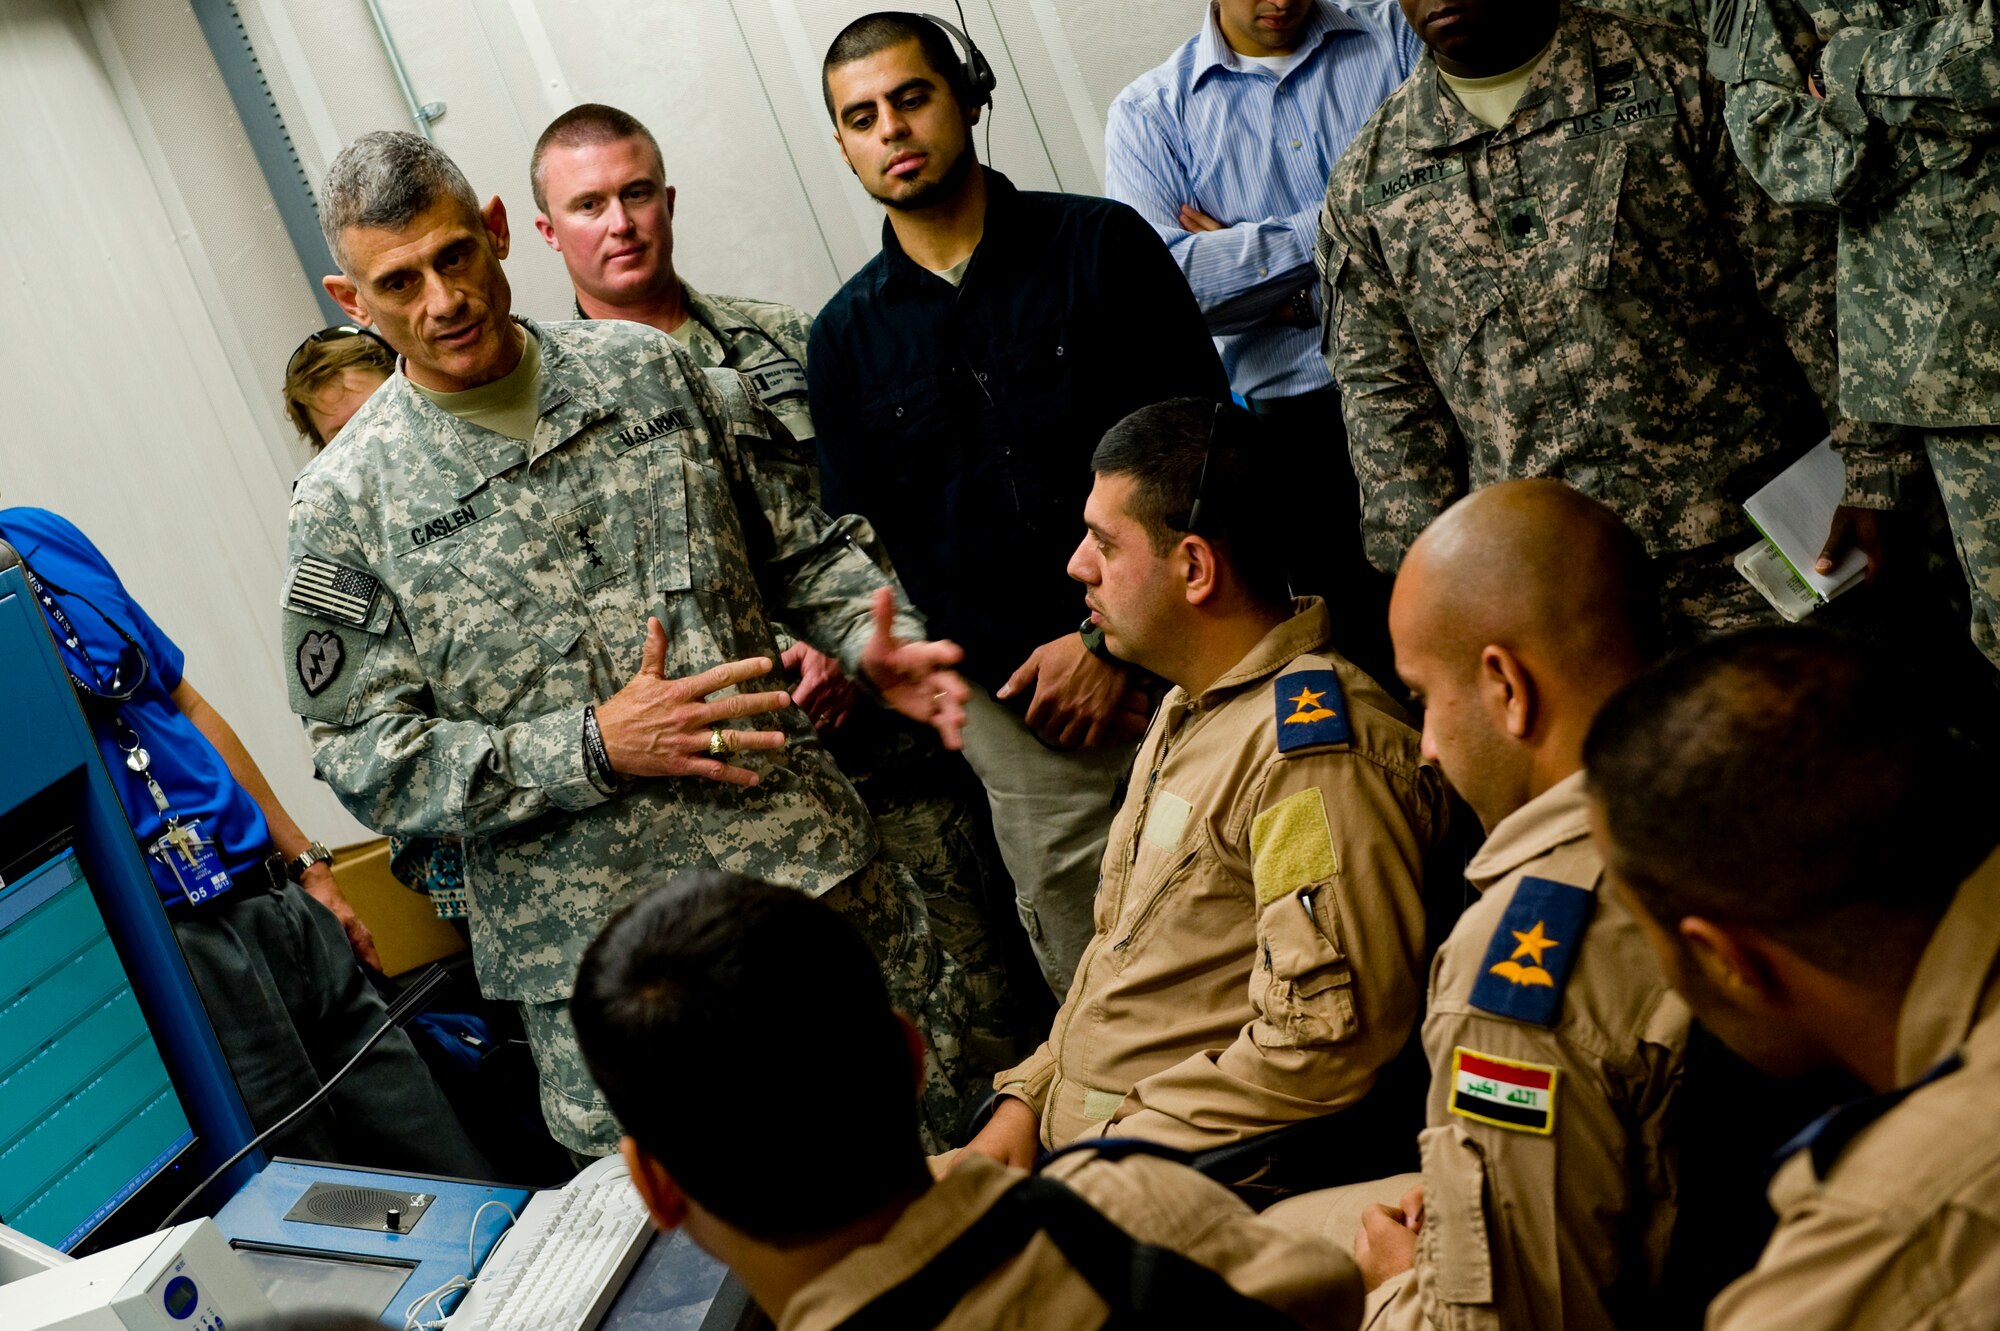 U.S. Army Lt. Gen. Robert Caslen, Office of Security Cooperation - Iraq commander, talks with Iraqi Air Traffic Control students, June 9, 2012 in Tikrit, Iraq. OSC - I in conjunction with the U.S. Embassy - Baghdad, the government of Iraq and international partners, conducts security cooperation in order to support Iraq's continued development into a sovereign stable and long-term self reliant strategic partner that contributes to peace and security in the region. (U.S. Air Force photo by Staff Sgt. Greg C. Biondo)